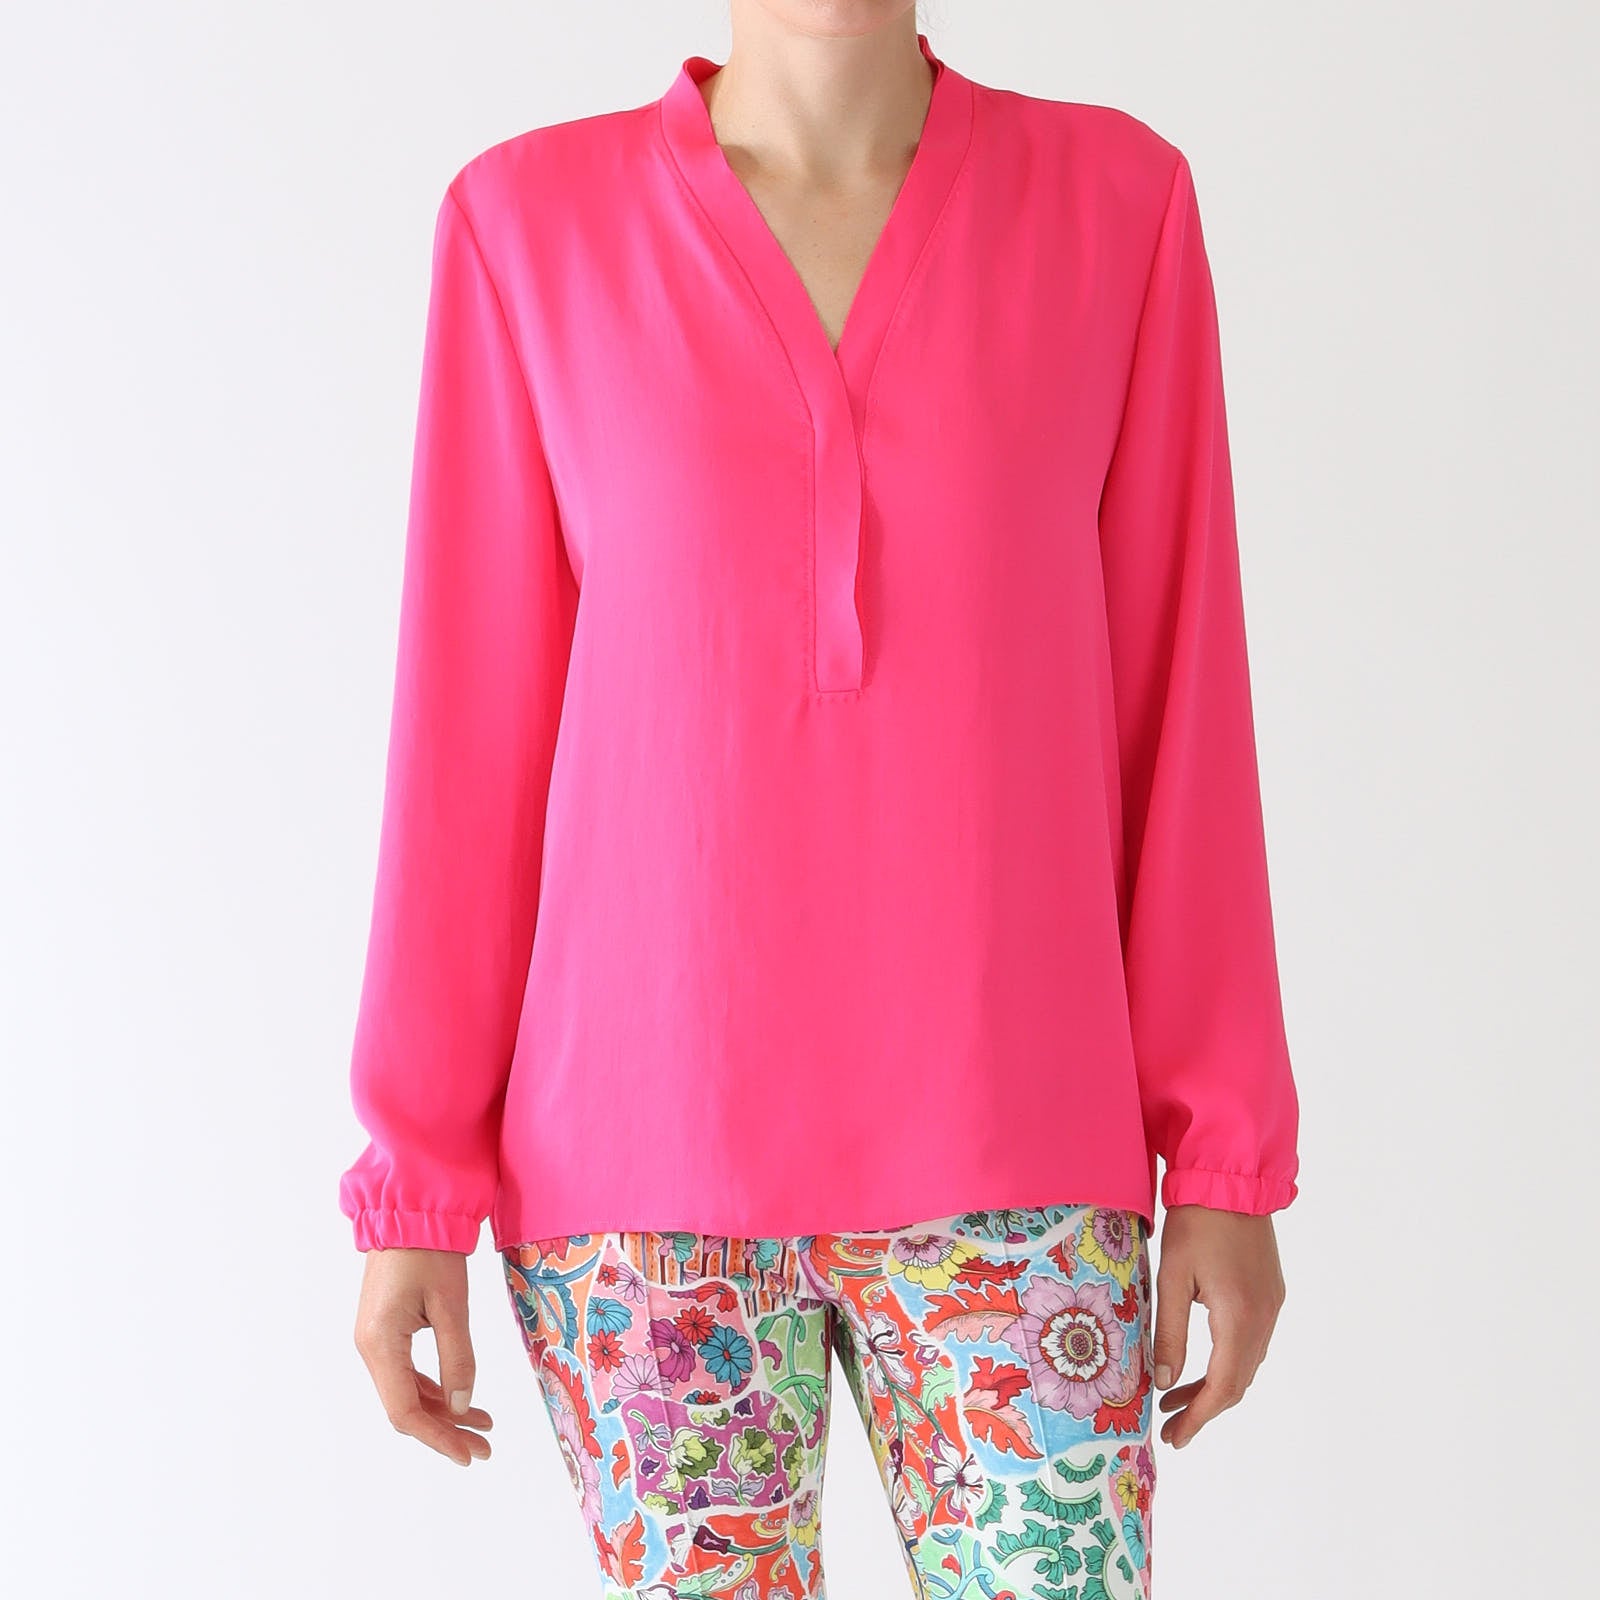 Super Pink Flowing Tunic Blouse